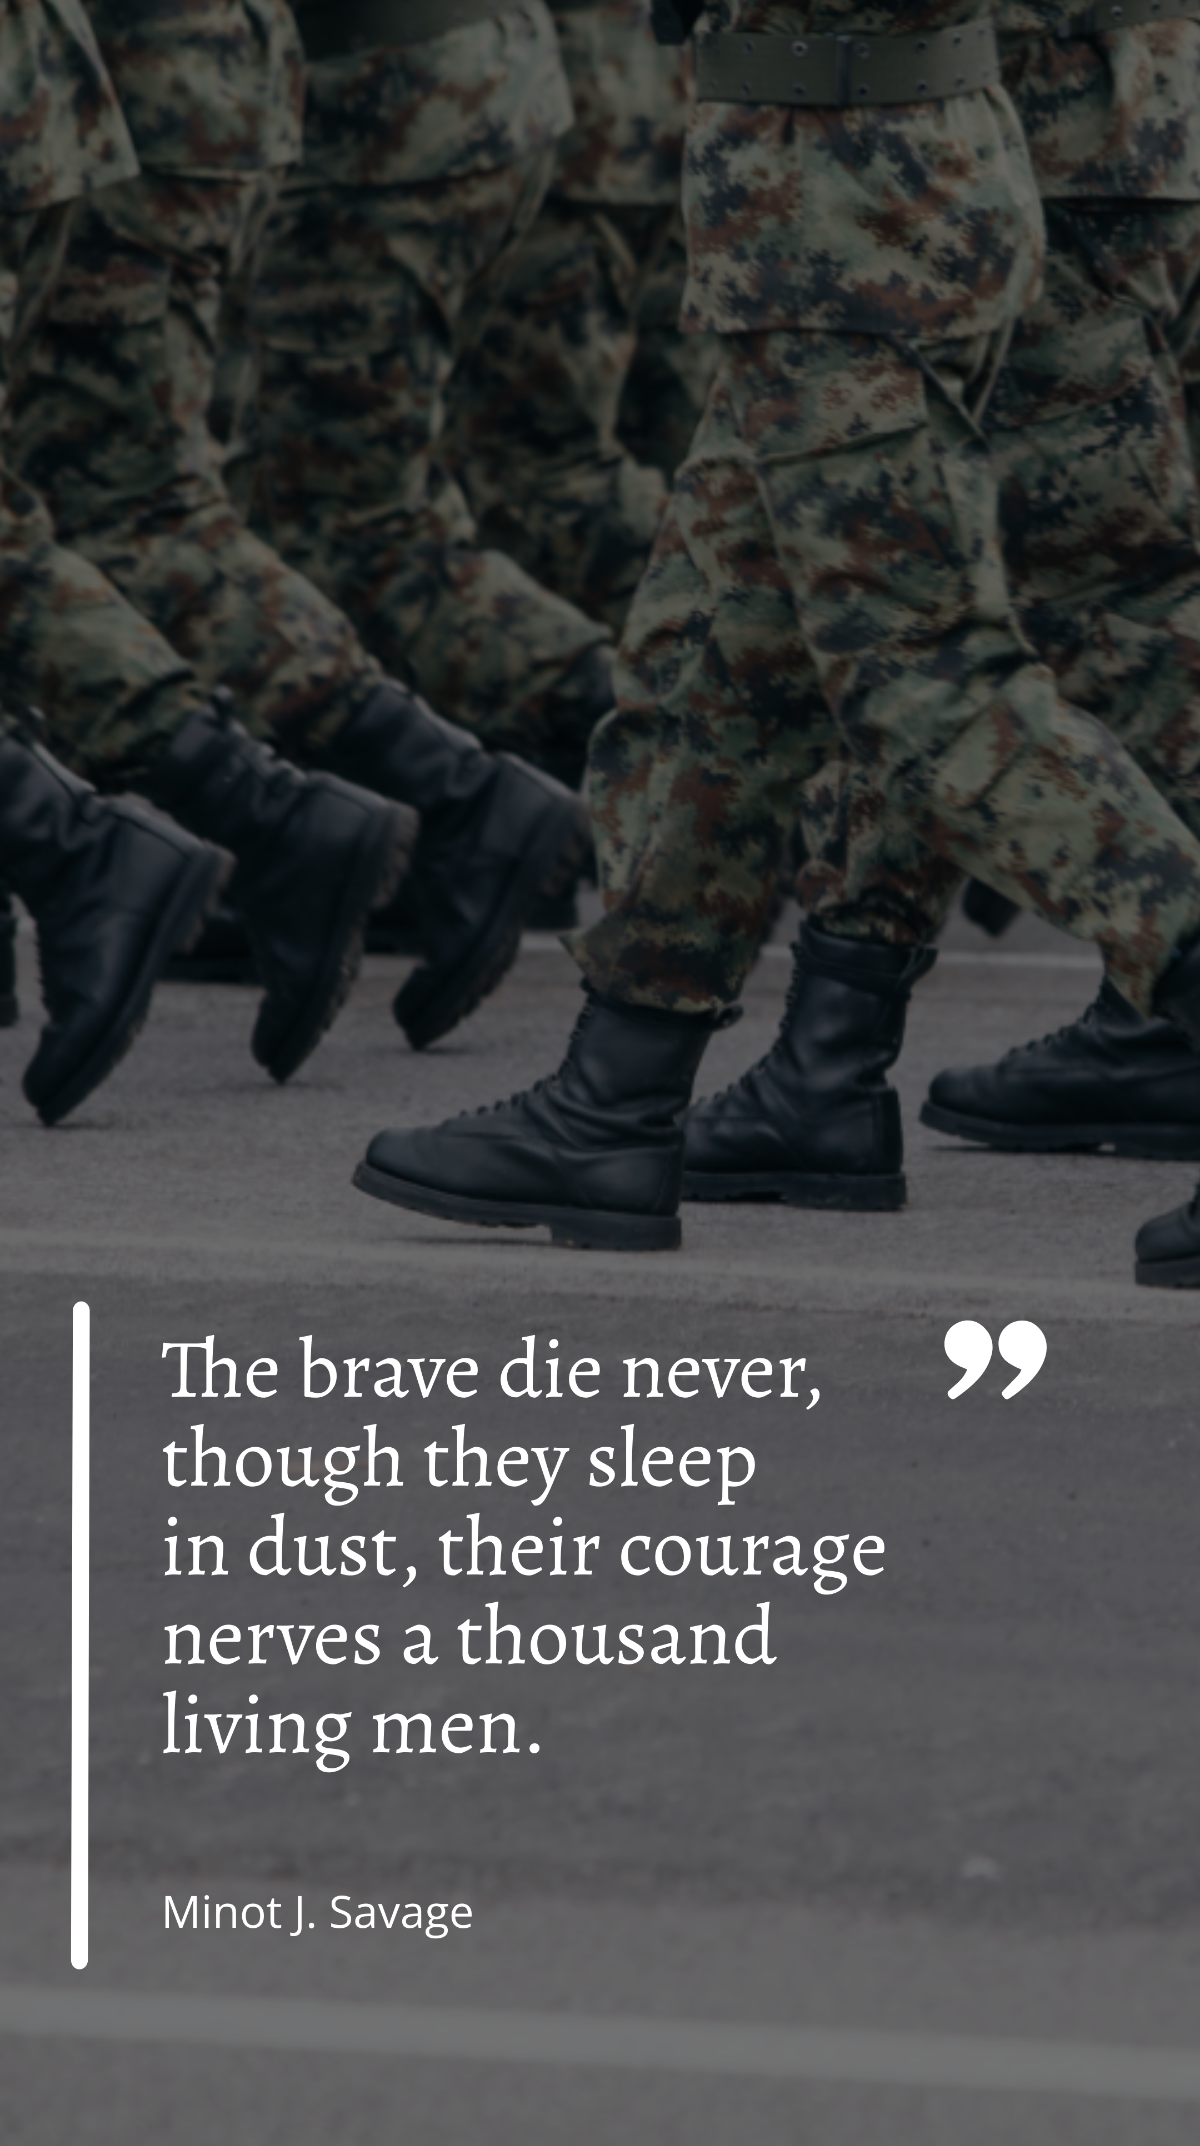 Free Minot J. Savage - ”The brave die never, though they sleep in dust, their courage nerves a thousand living men.” Template